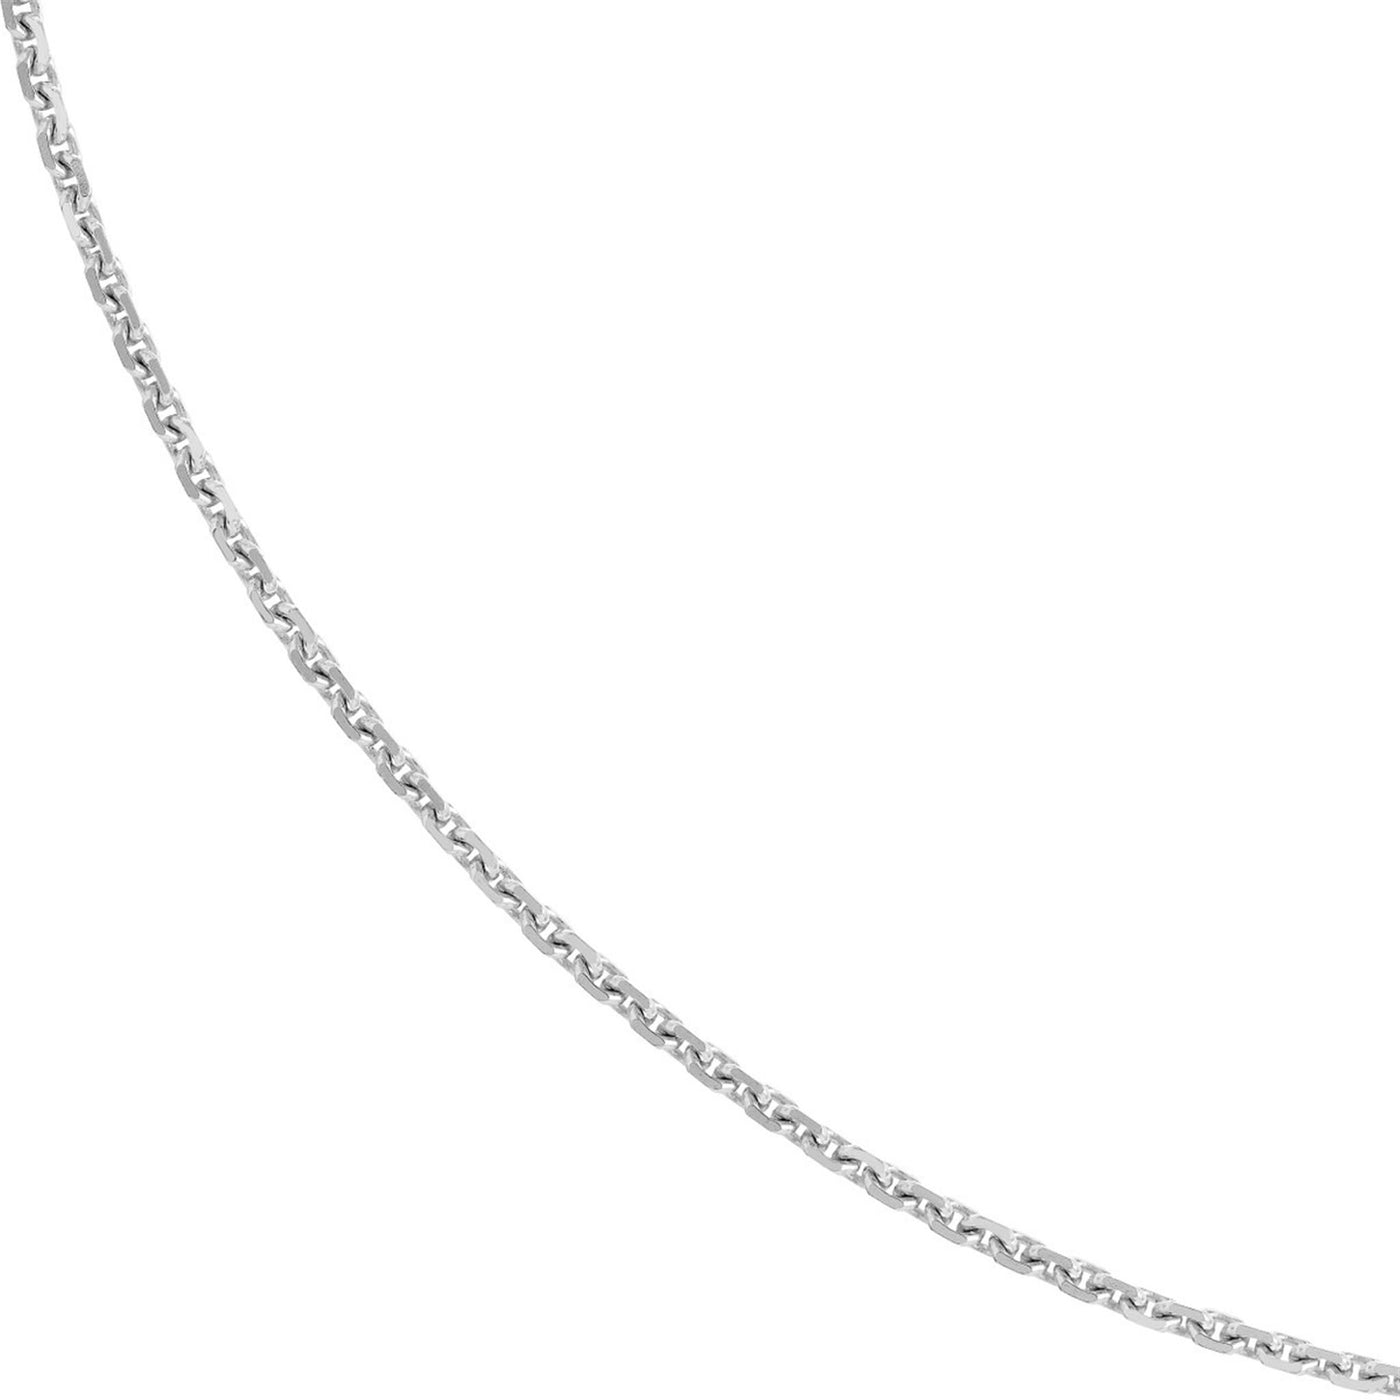 Sterling Silver 1.25mm 24" Cable Link Chain